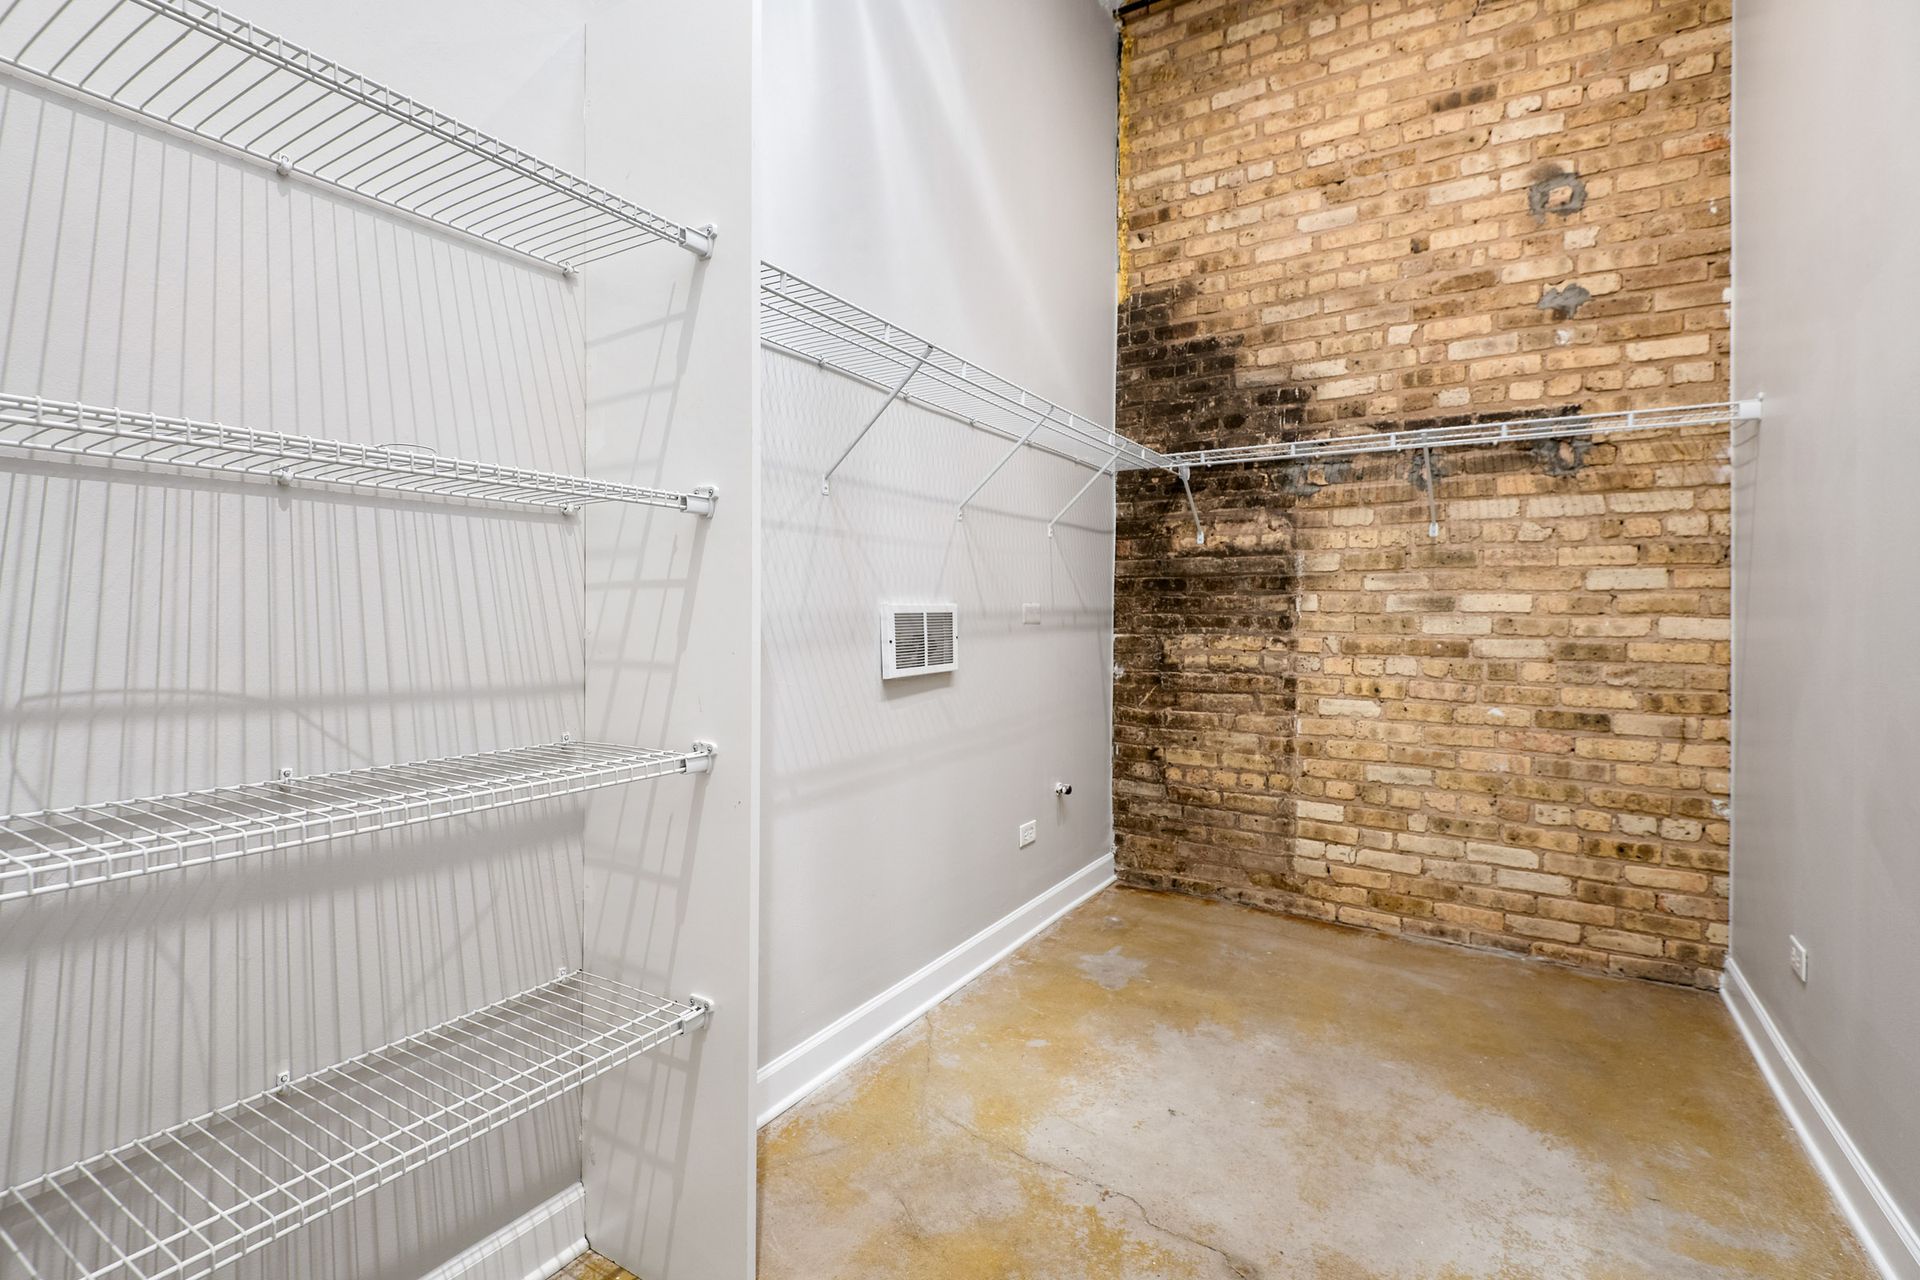 An empty closet with a brick wall and wire shelves.